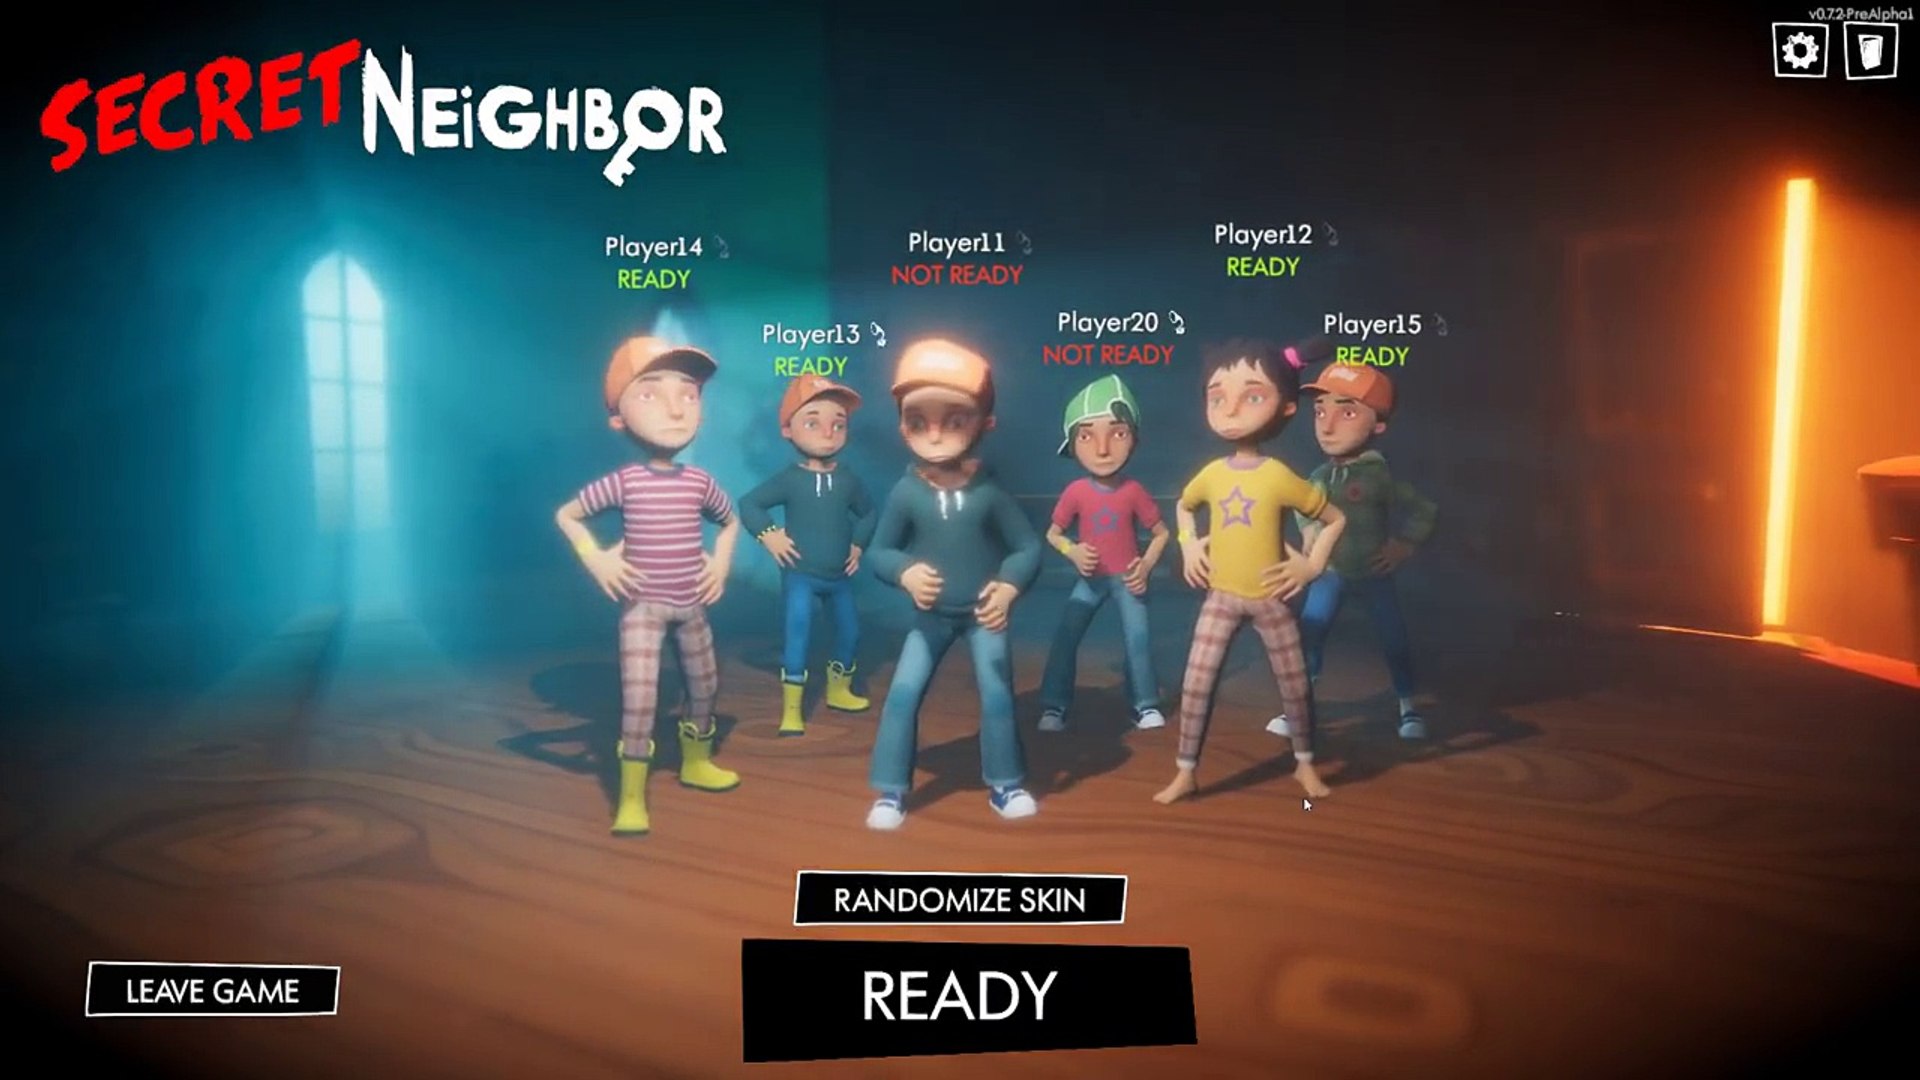 Secret Neighbor - Our First Look! - WHICH ONE OF US IS THE NEIGHBOR????  1V5! - Dailymotion Video